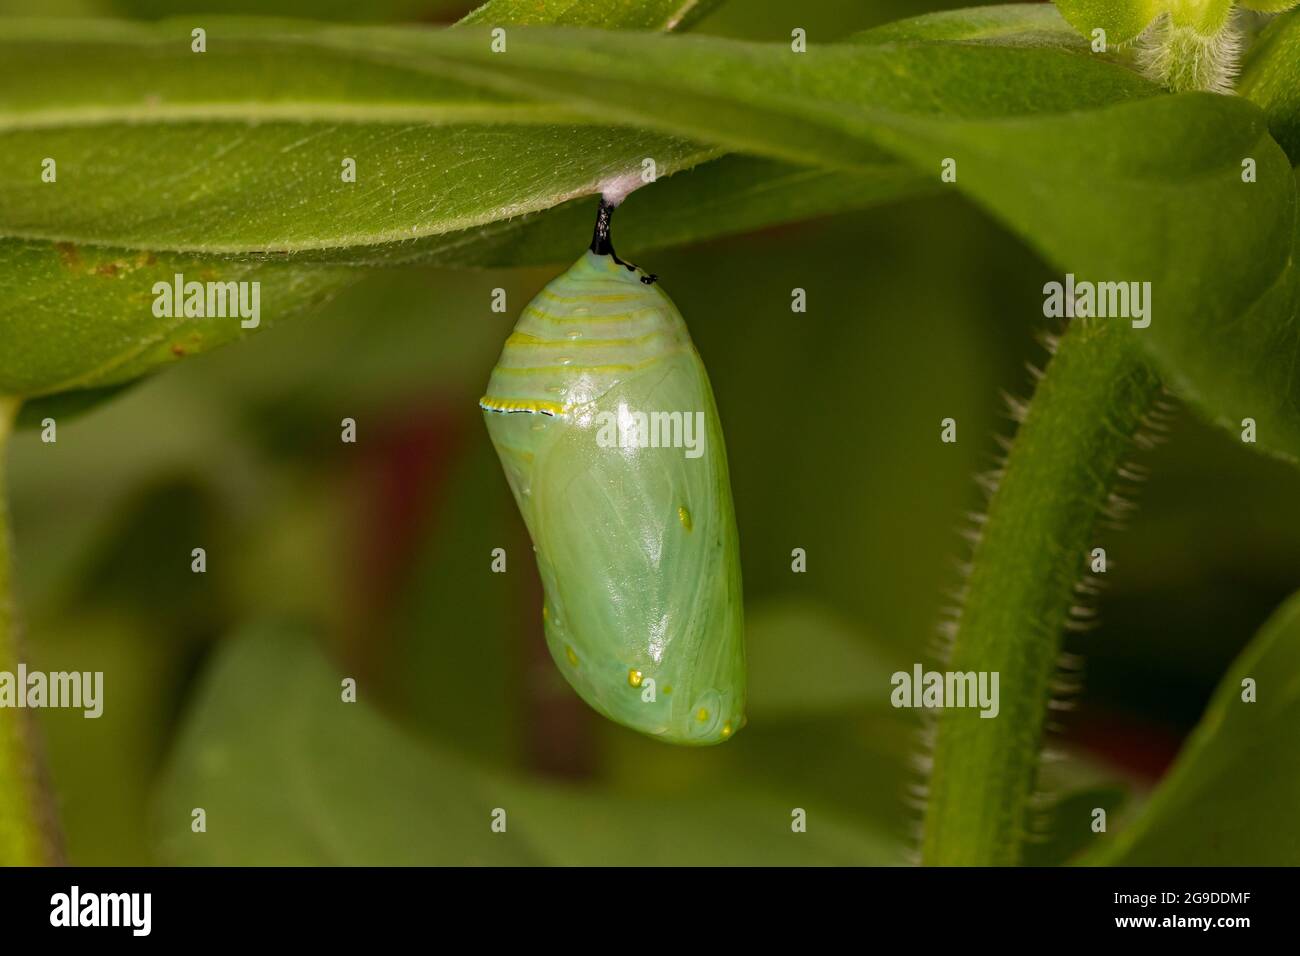 Monarch butterfly chrysalis hanging from flower leaf. Butterfly conservation, life cycle, habitat preservation, and backyard flower garden concept. Stock Photo